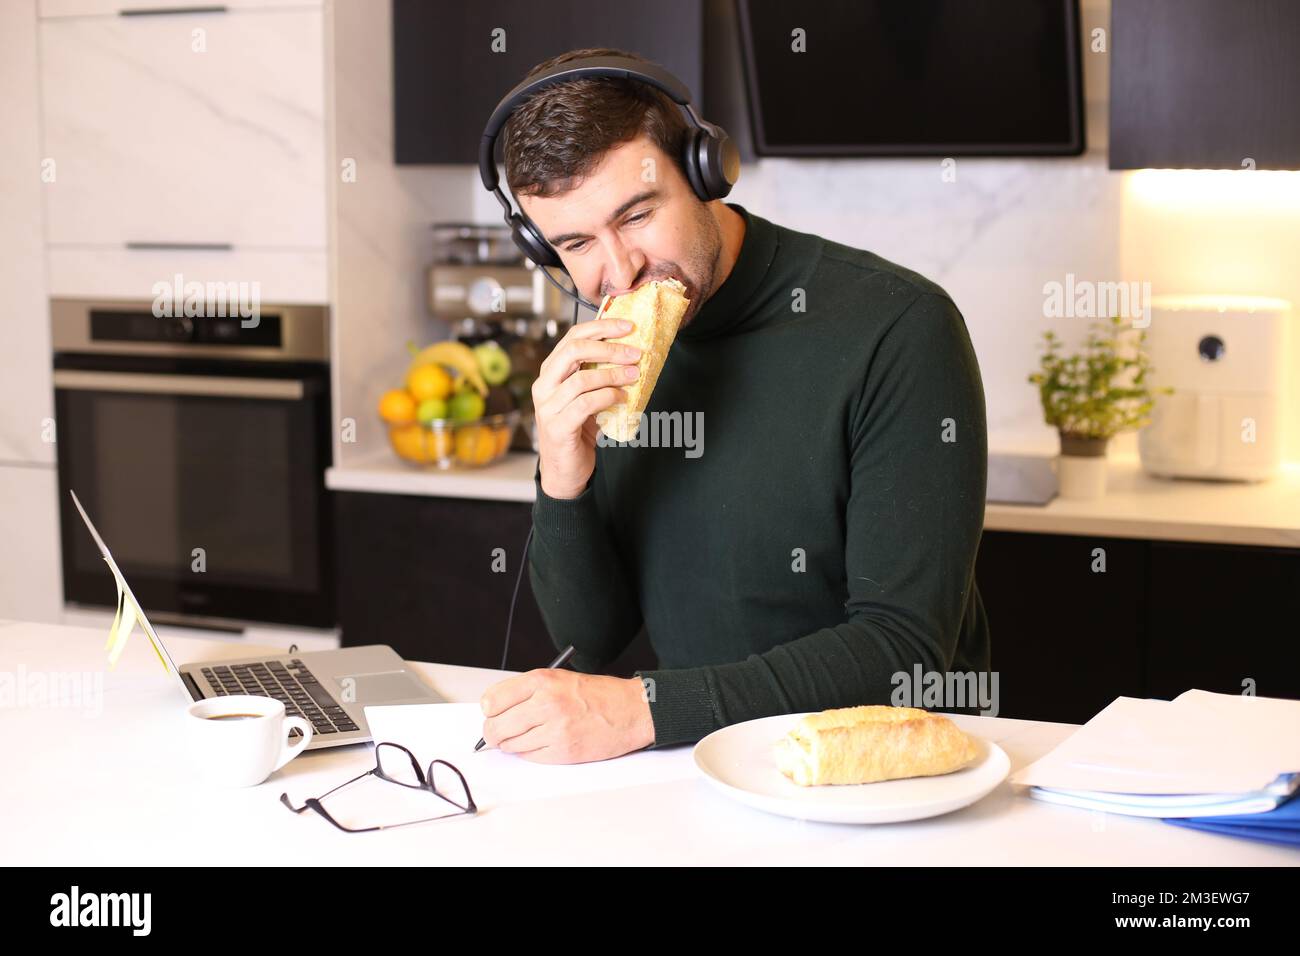 Busy man eating a sandwich while on conference call Stock Photo